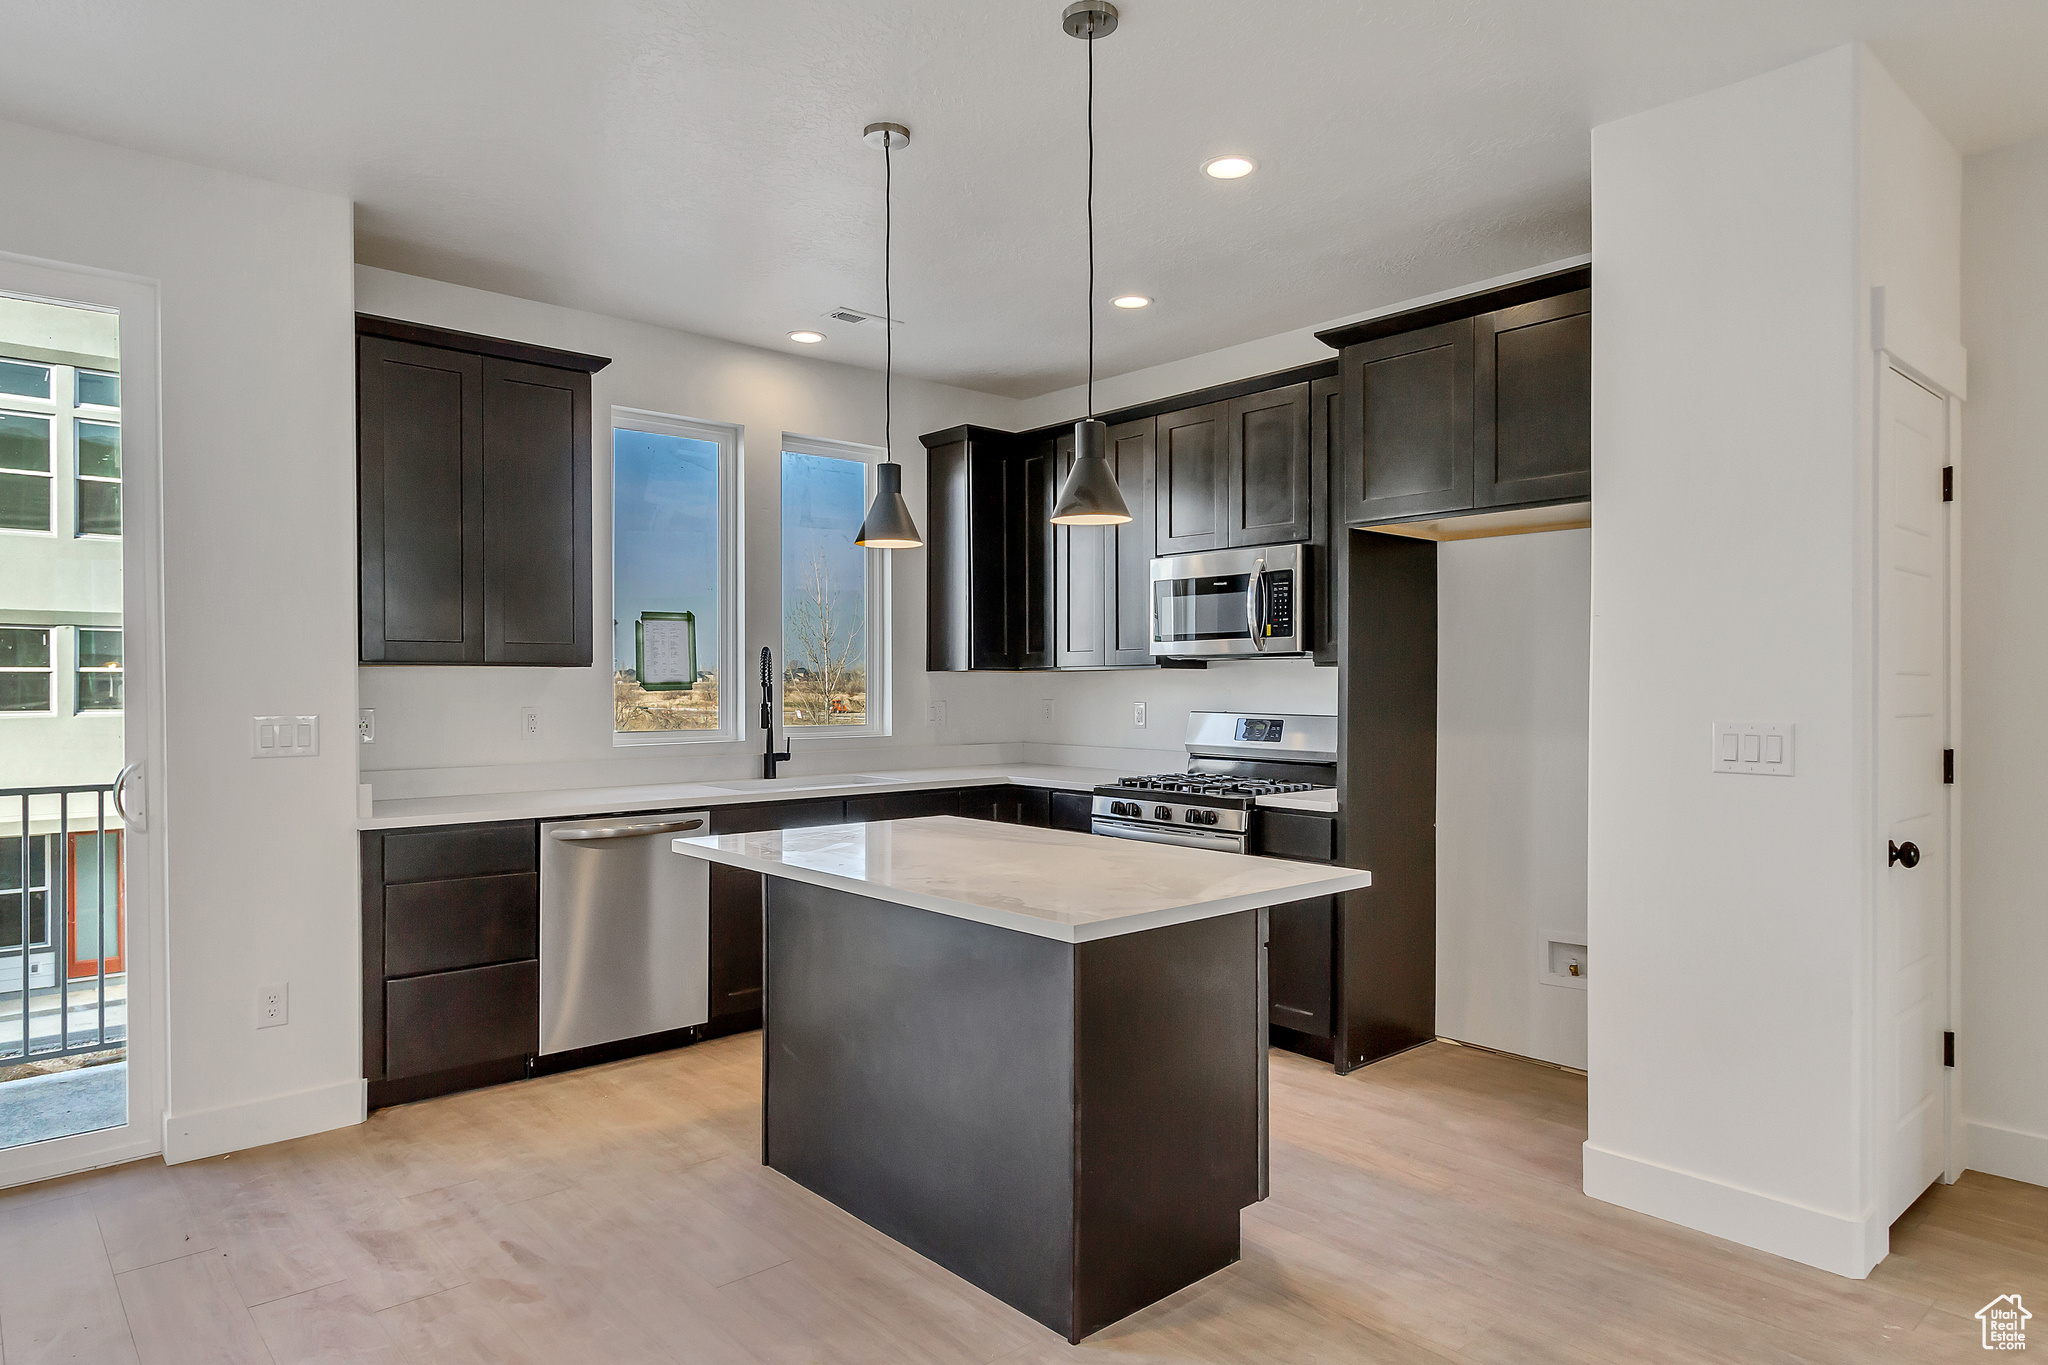 Kitchen with a wealth of natural light, appliances with stainless steel finishes, light hardwood / wood-style flooring, and a kitchen island